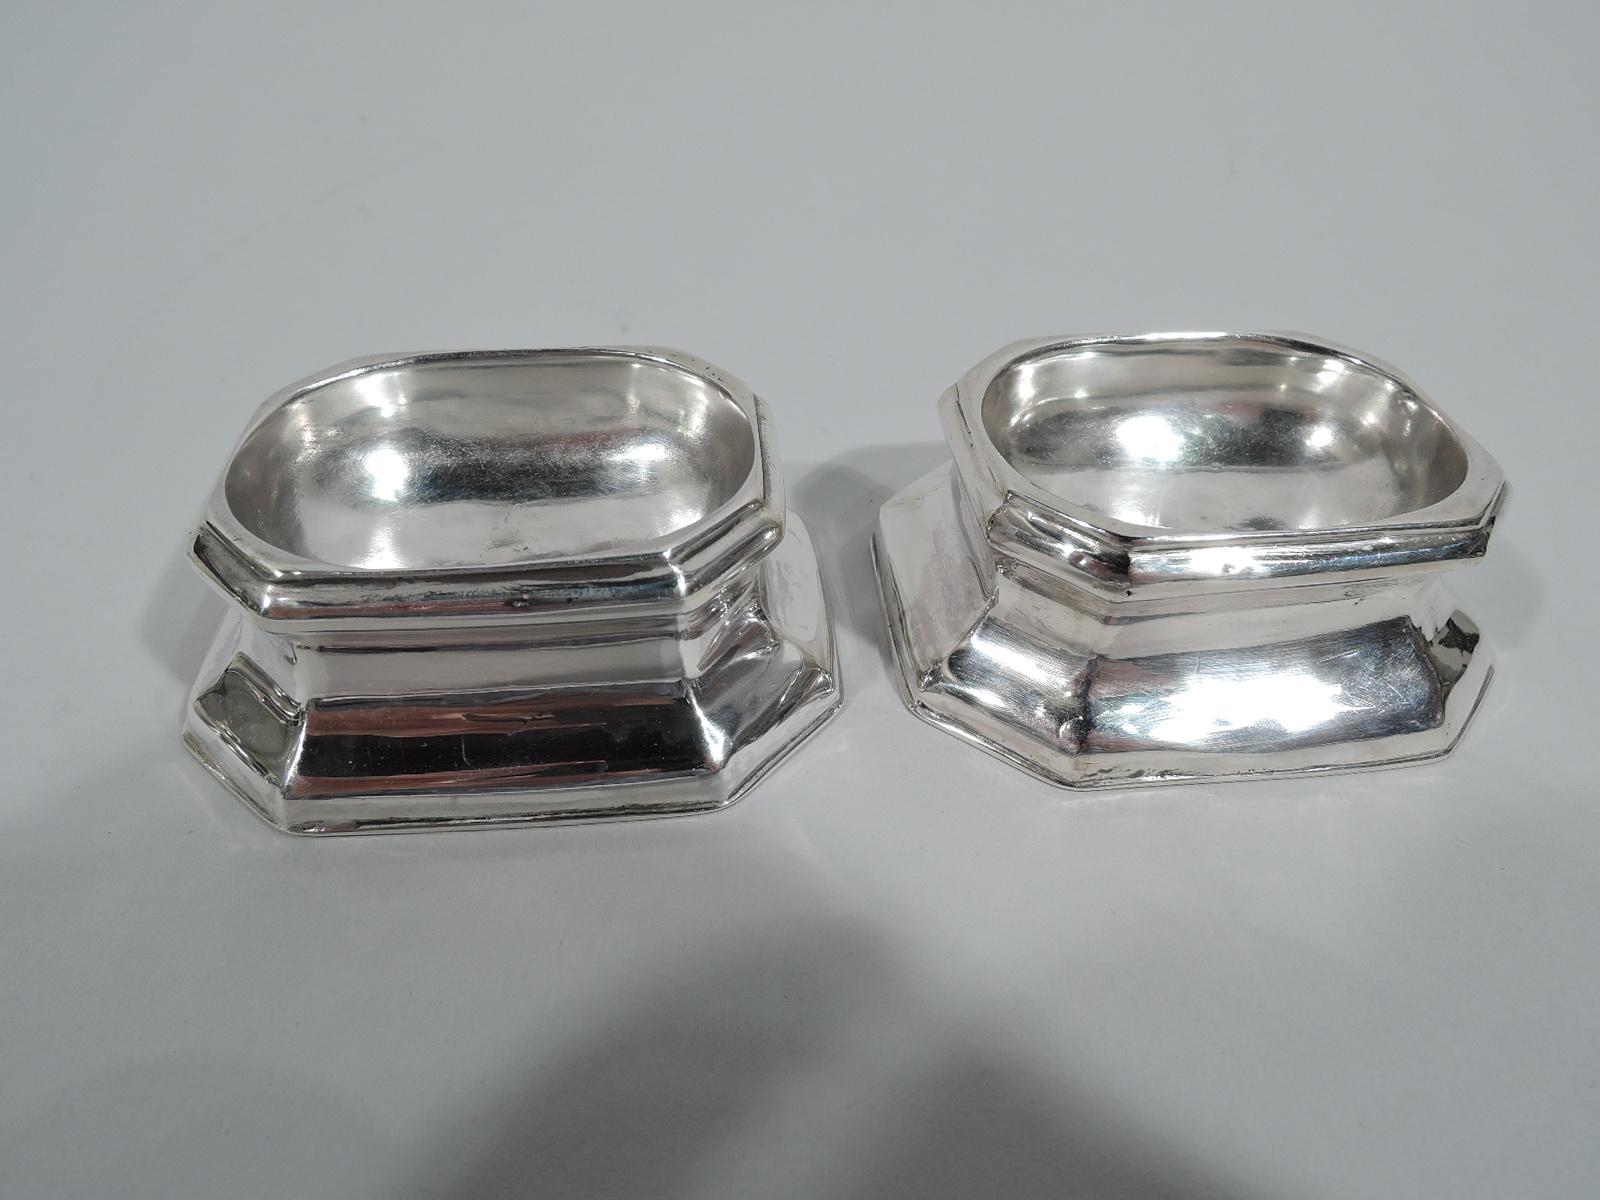 Set of 4 English Georgian sterling silver open salts, 1721-1732. Each: Oval well in spread rectilinear body with chamfered corners. An early version of the perennially popular form. Fully marked including London assay stamp, date letters for 1721,